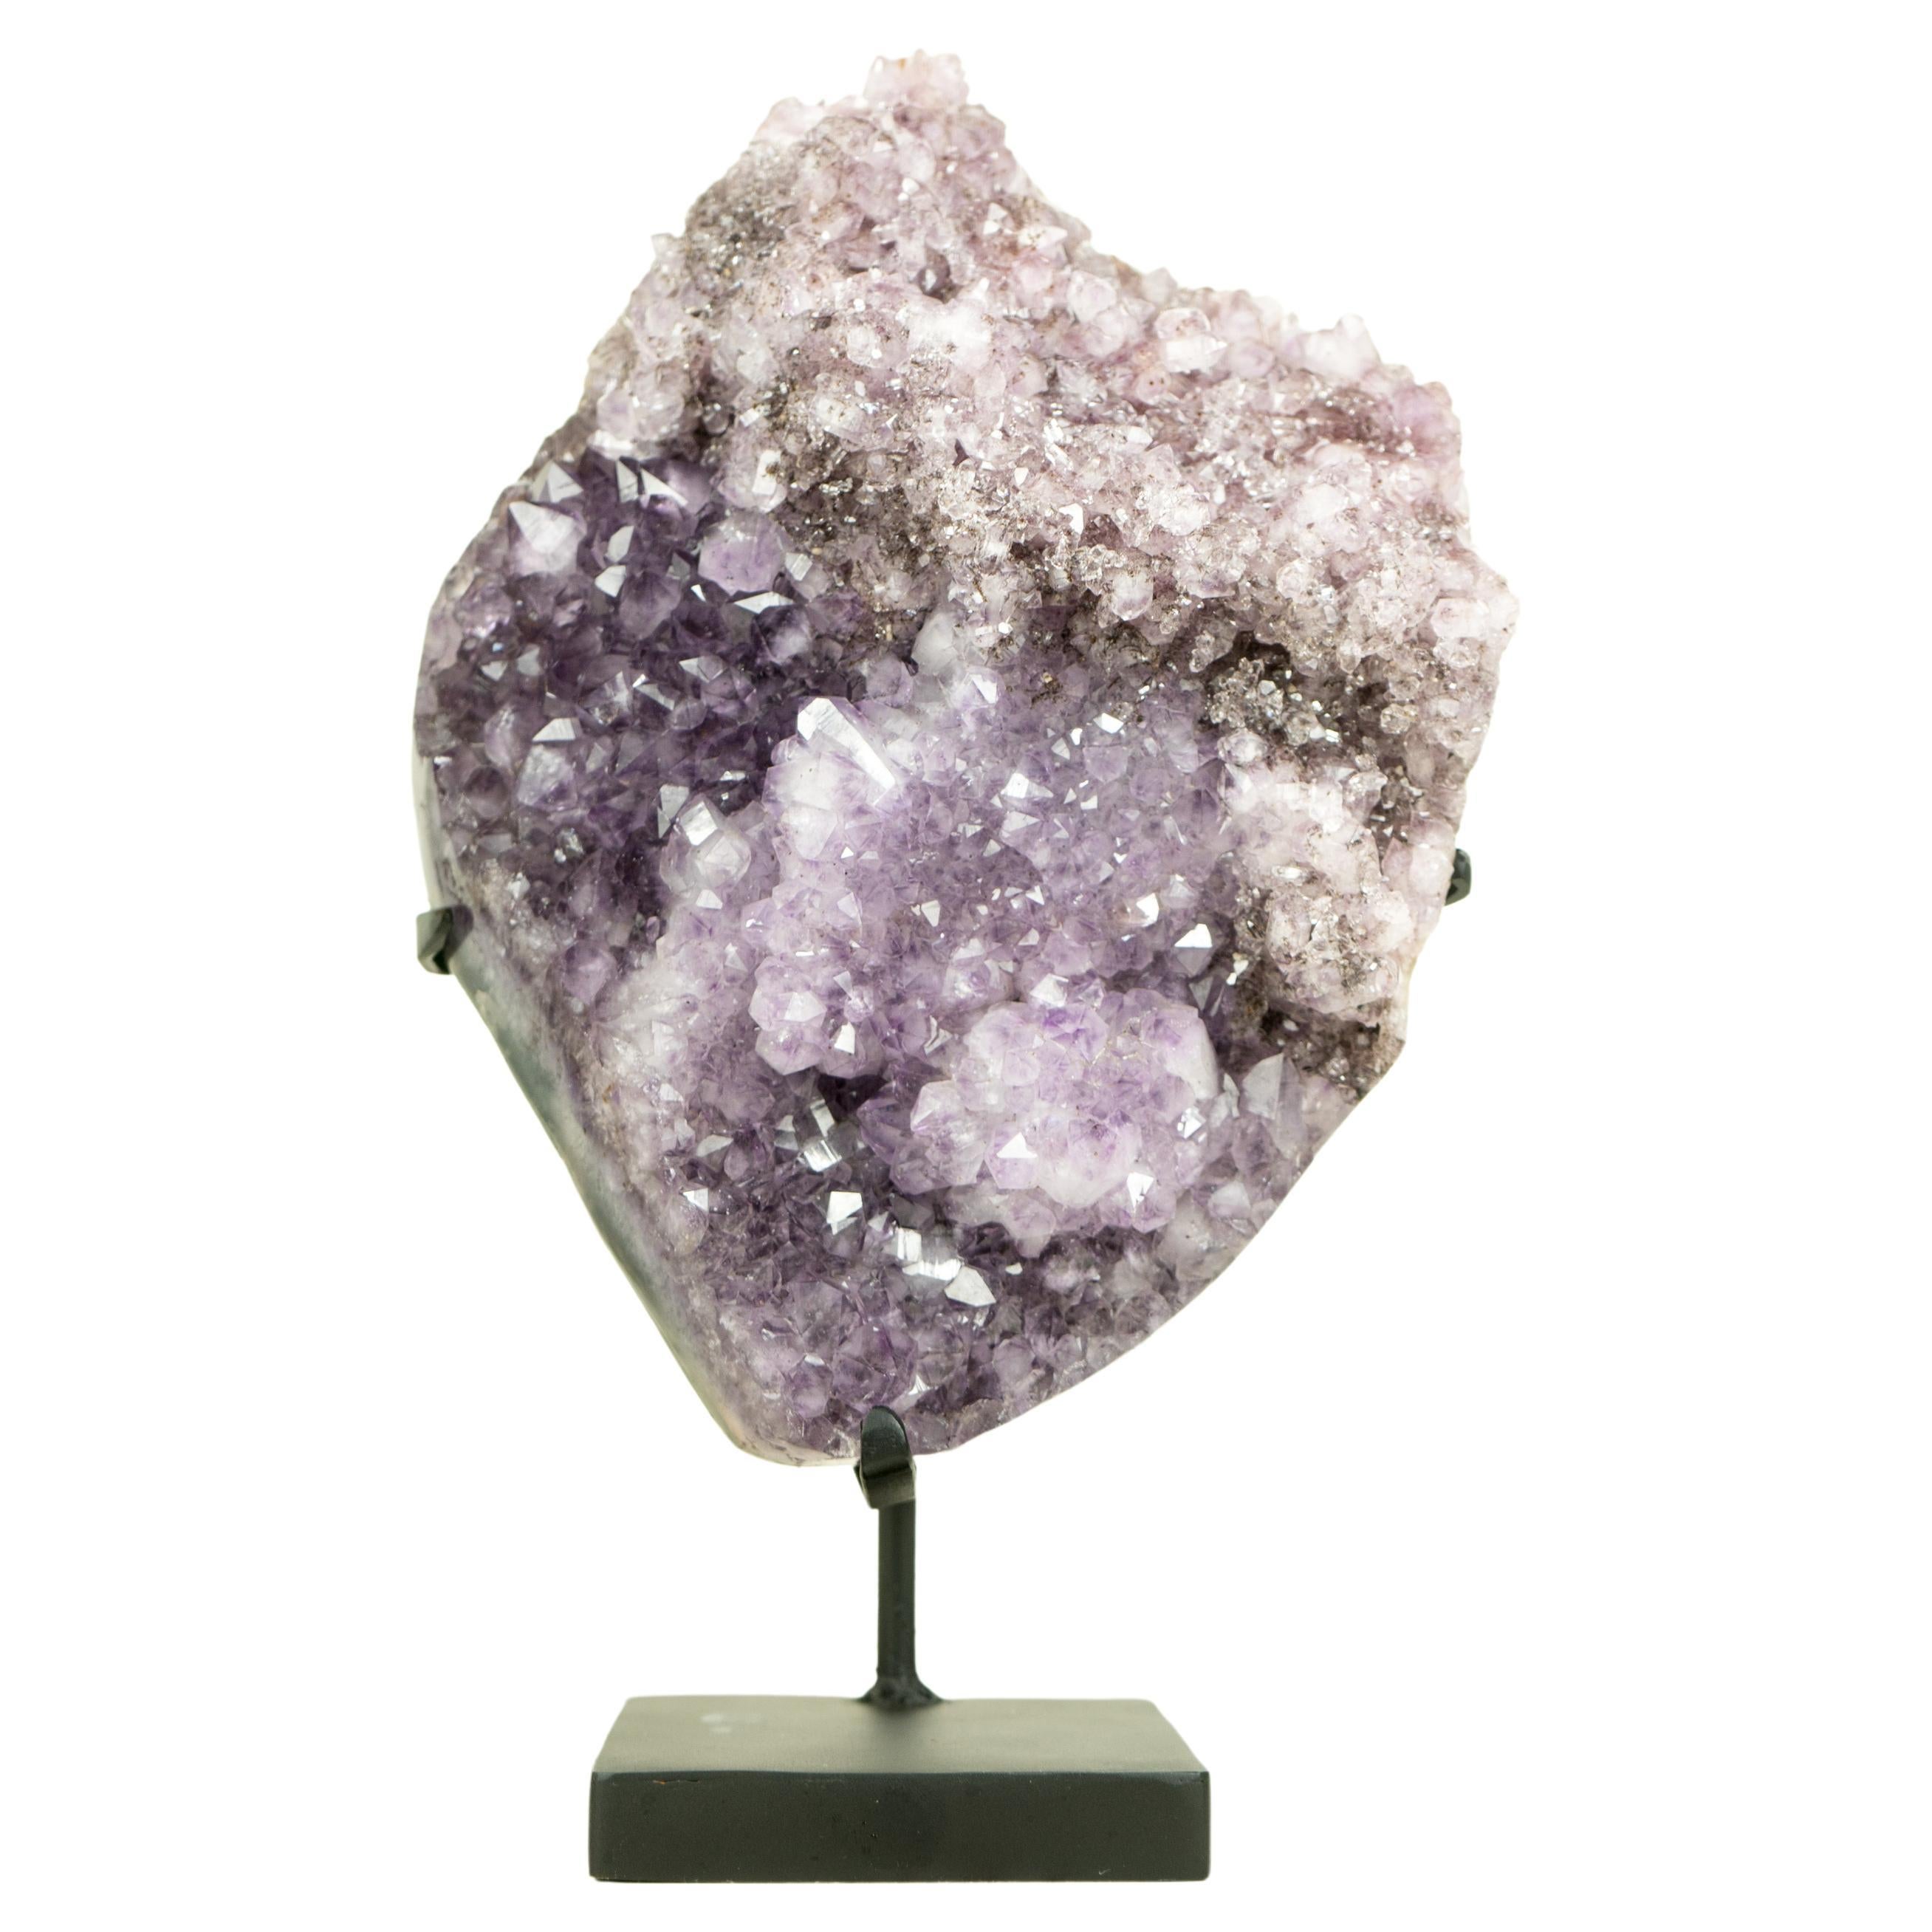 Gorgeous Multi Colored Amethyst Cluster with Herkimer-Style Amethyst Crystal